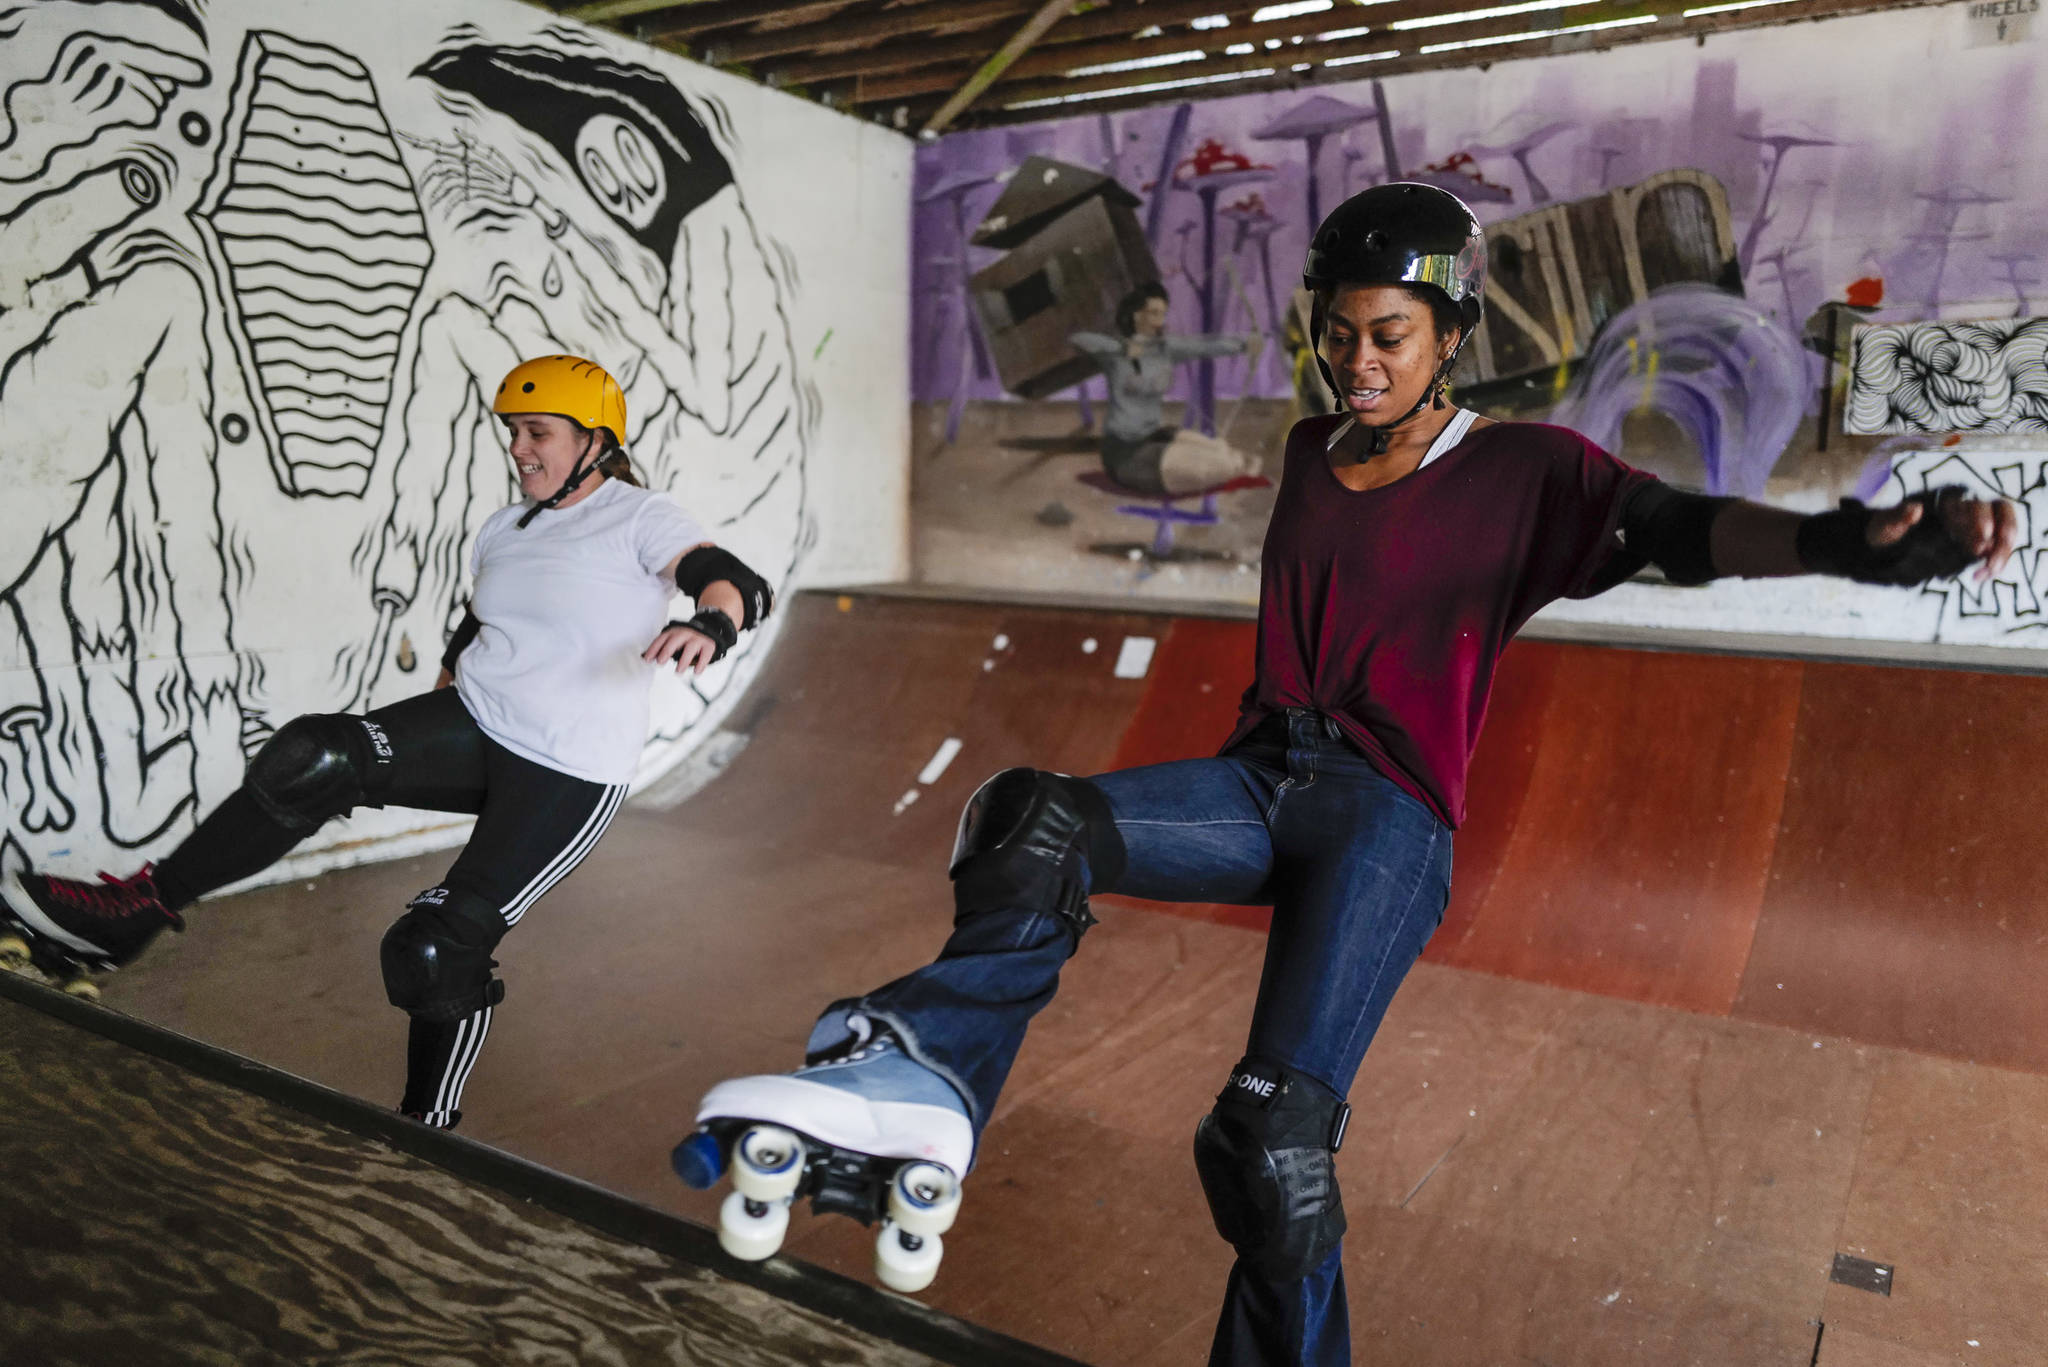 Jennifer Gross and Shabadrang Khalsa, who skate with the Juneau Rollergirls, get their daily skate in at the Pipeline Skate Park on Friday, Oct. 11, 2019. The two are skating everyday as part of a challenge to everyday for a year. (Michael Penn | Juneau Empire)